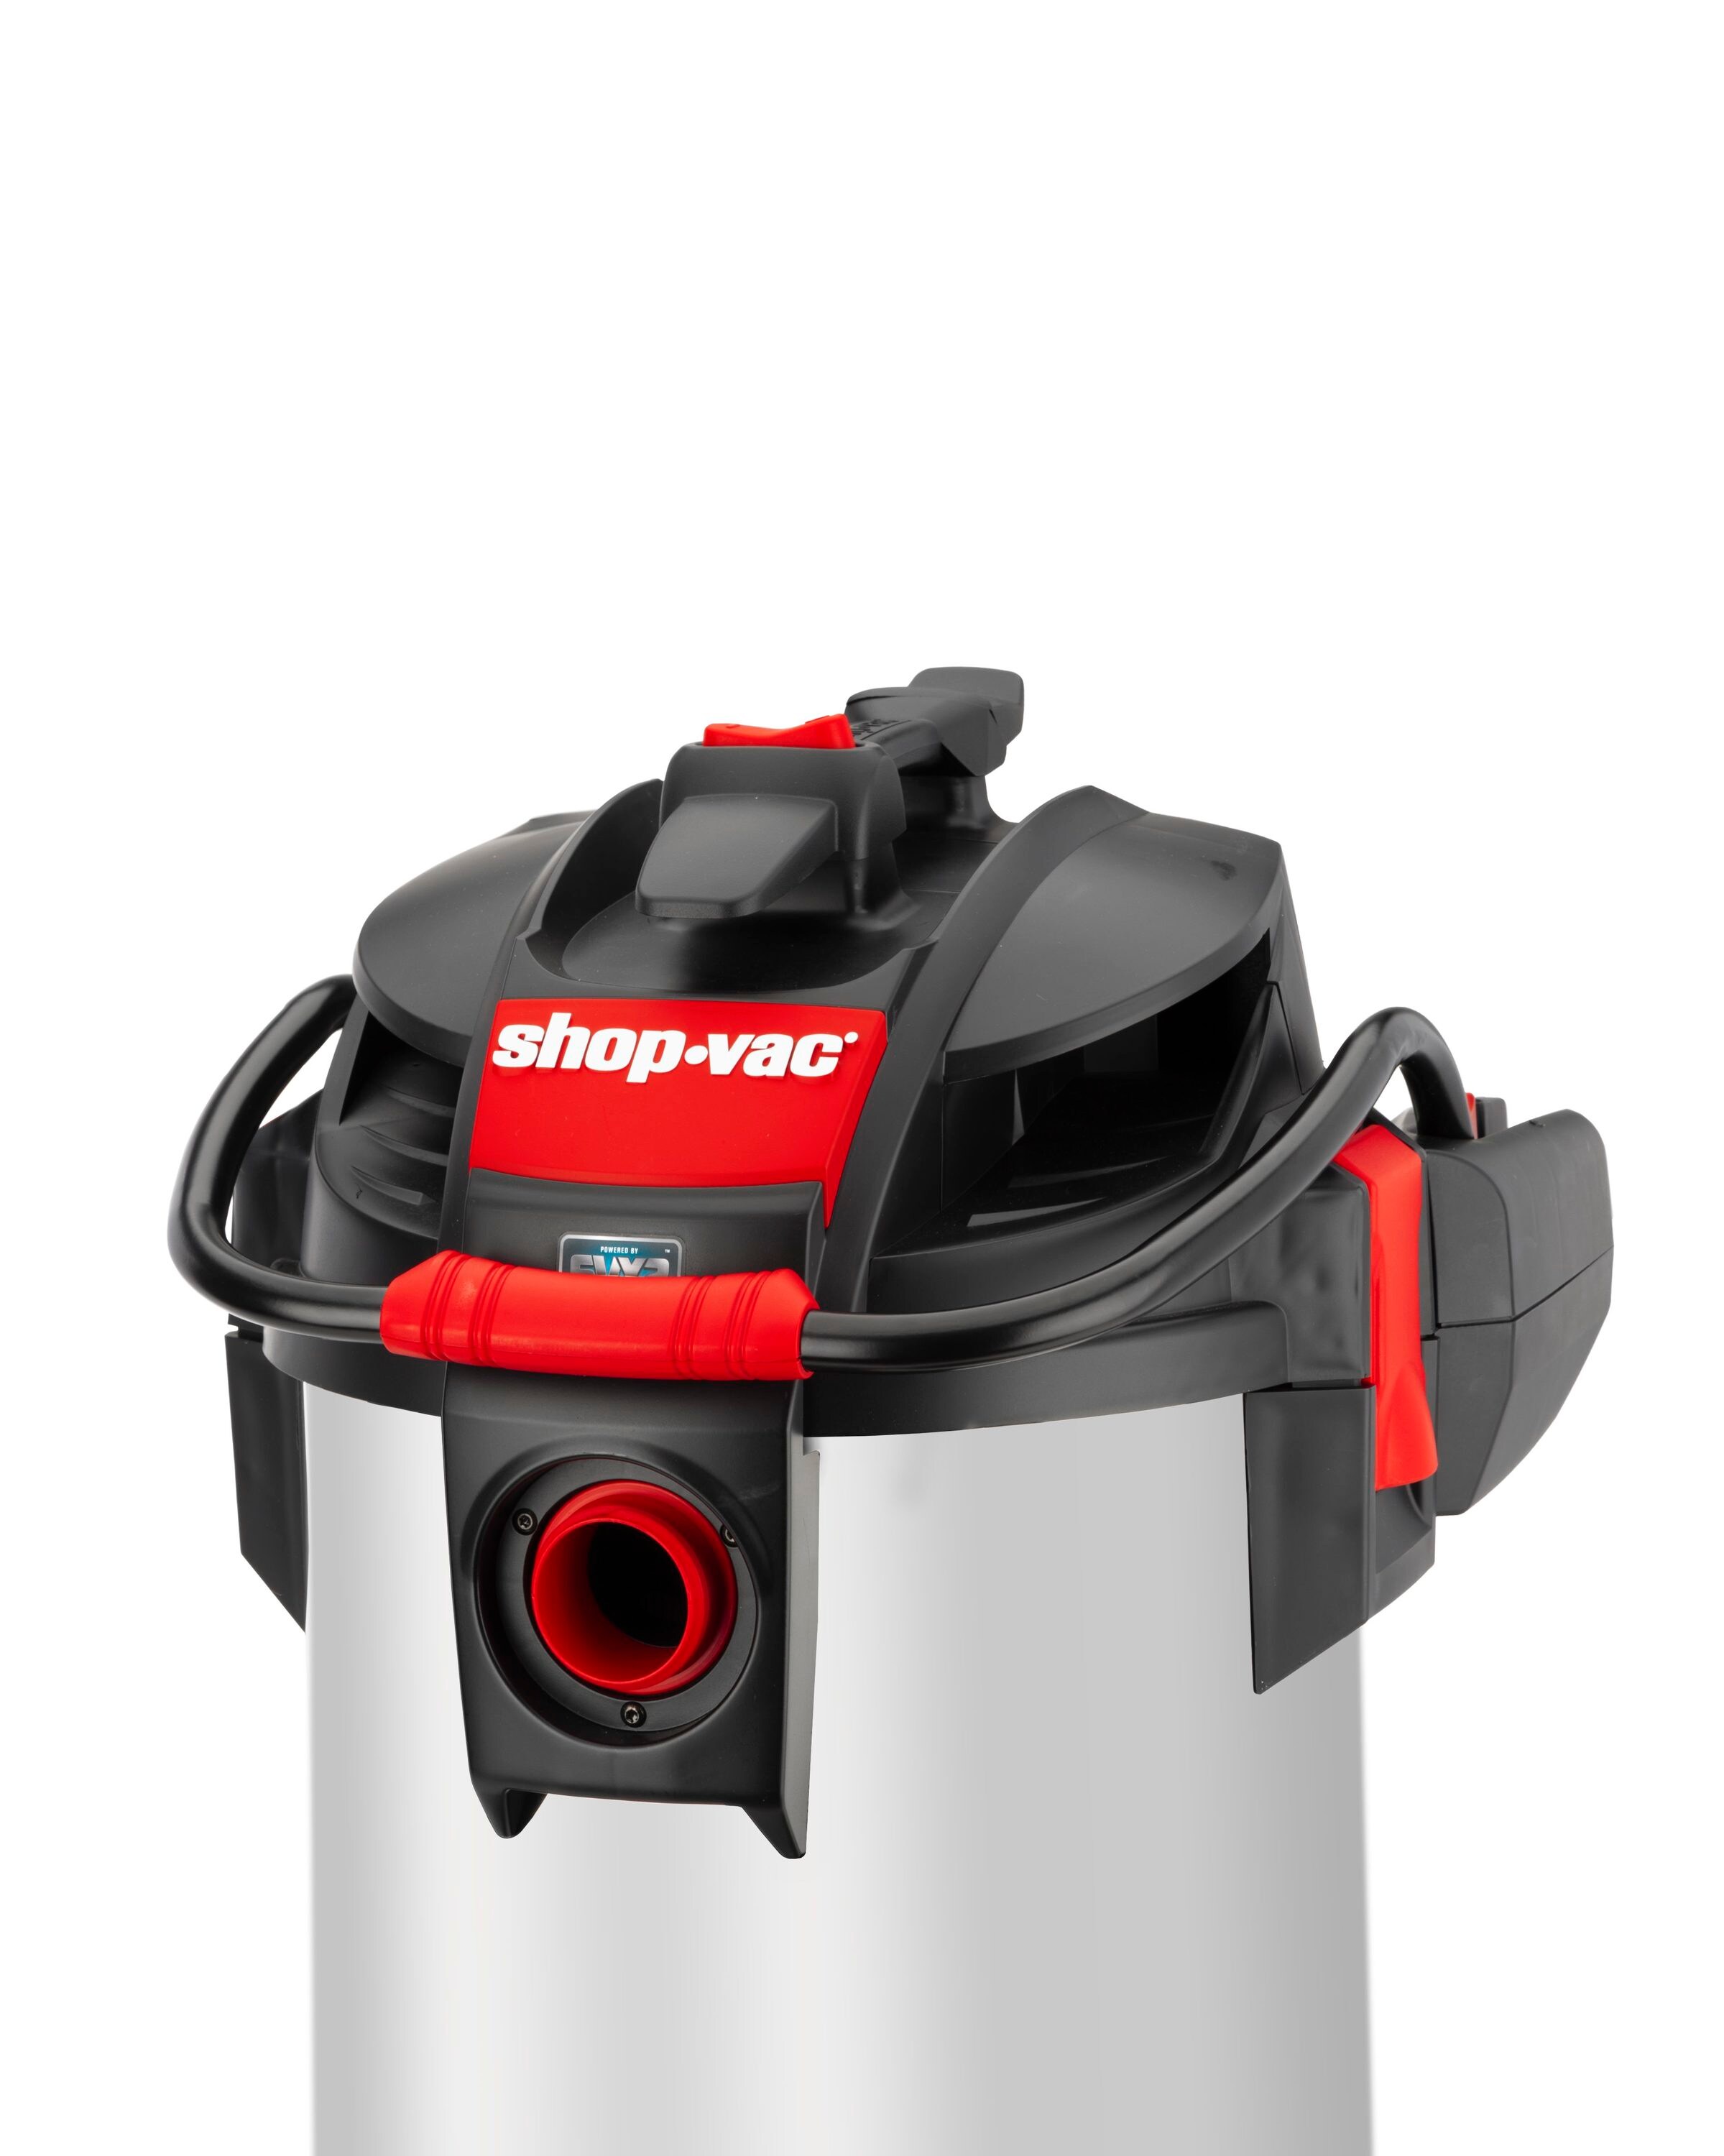 Shop-Vac 16-Gallons 6-HP Corded Shop Vacuum with Accessories